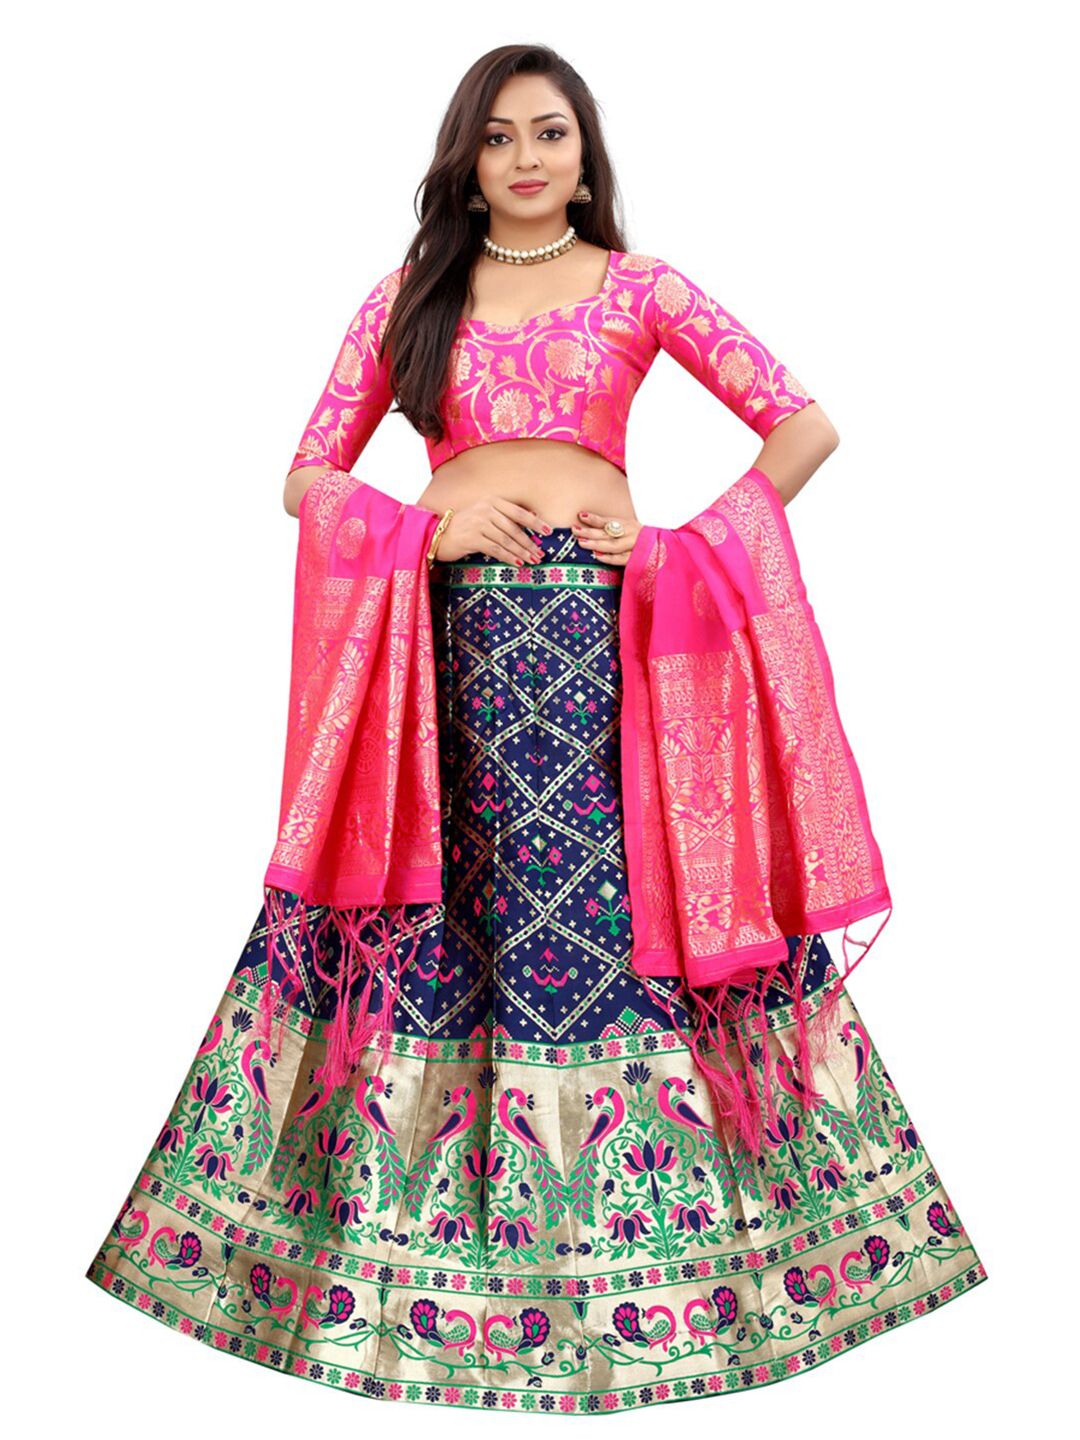 Xenilla Blue & Green Embroidered Semi-Stitched Lehenga & Blouse With Dupatta Price in India